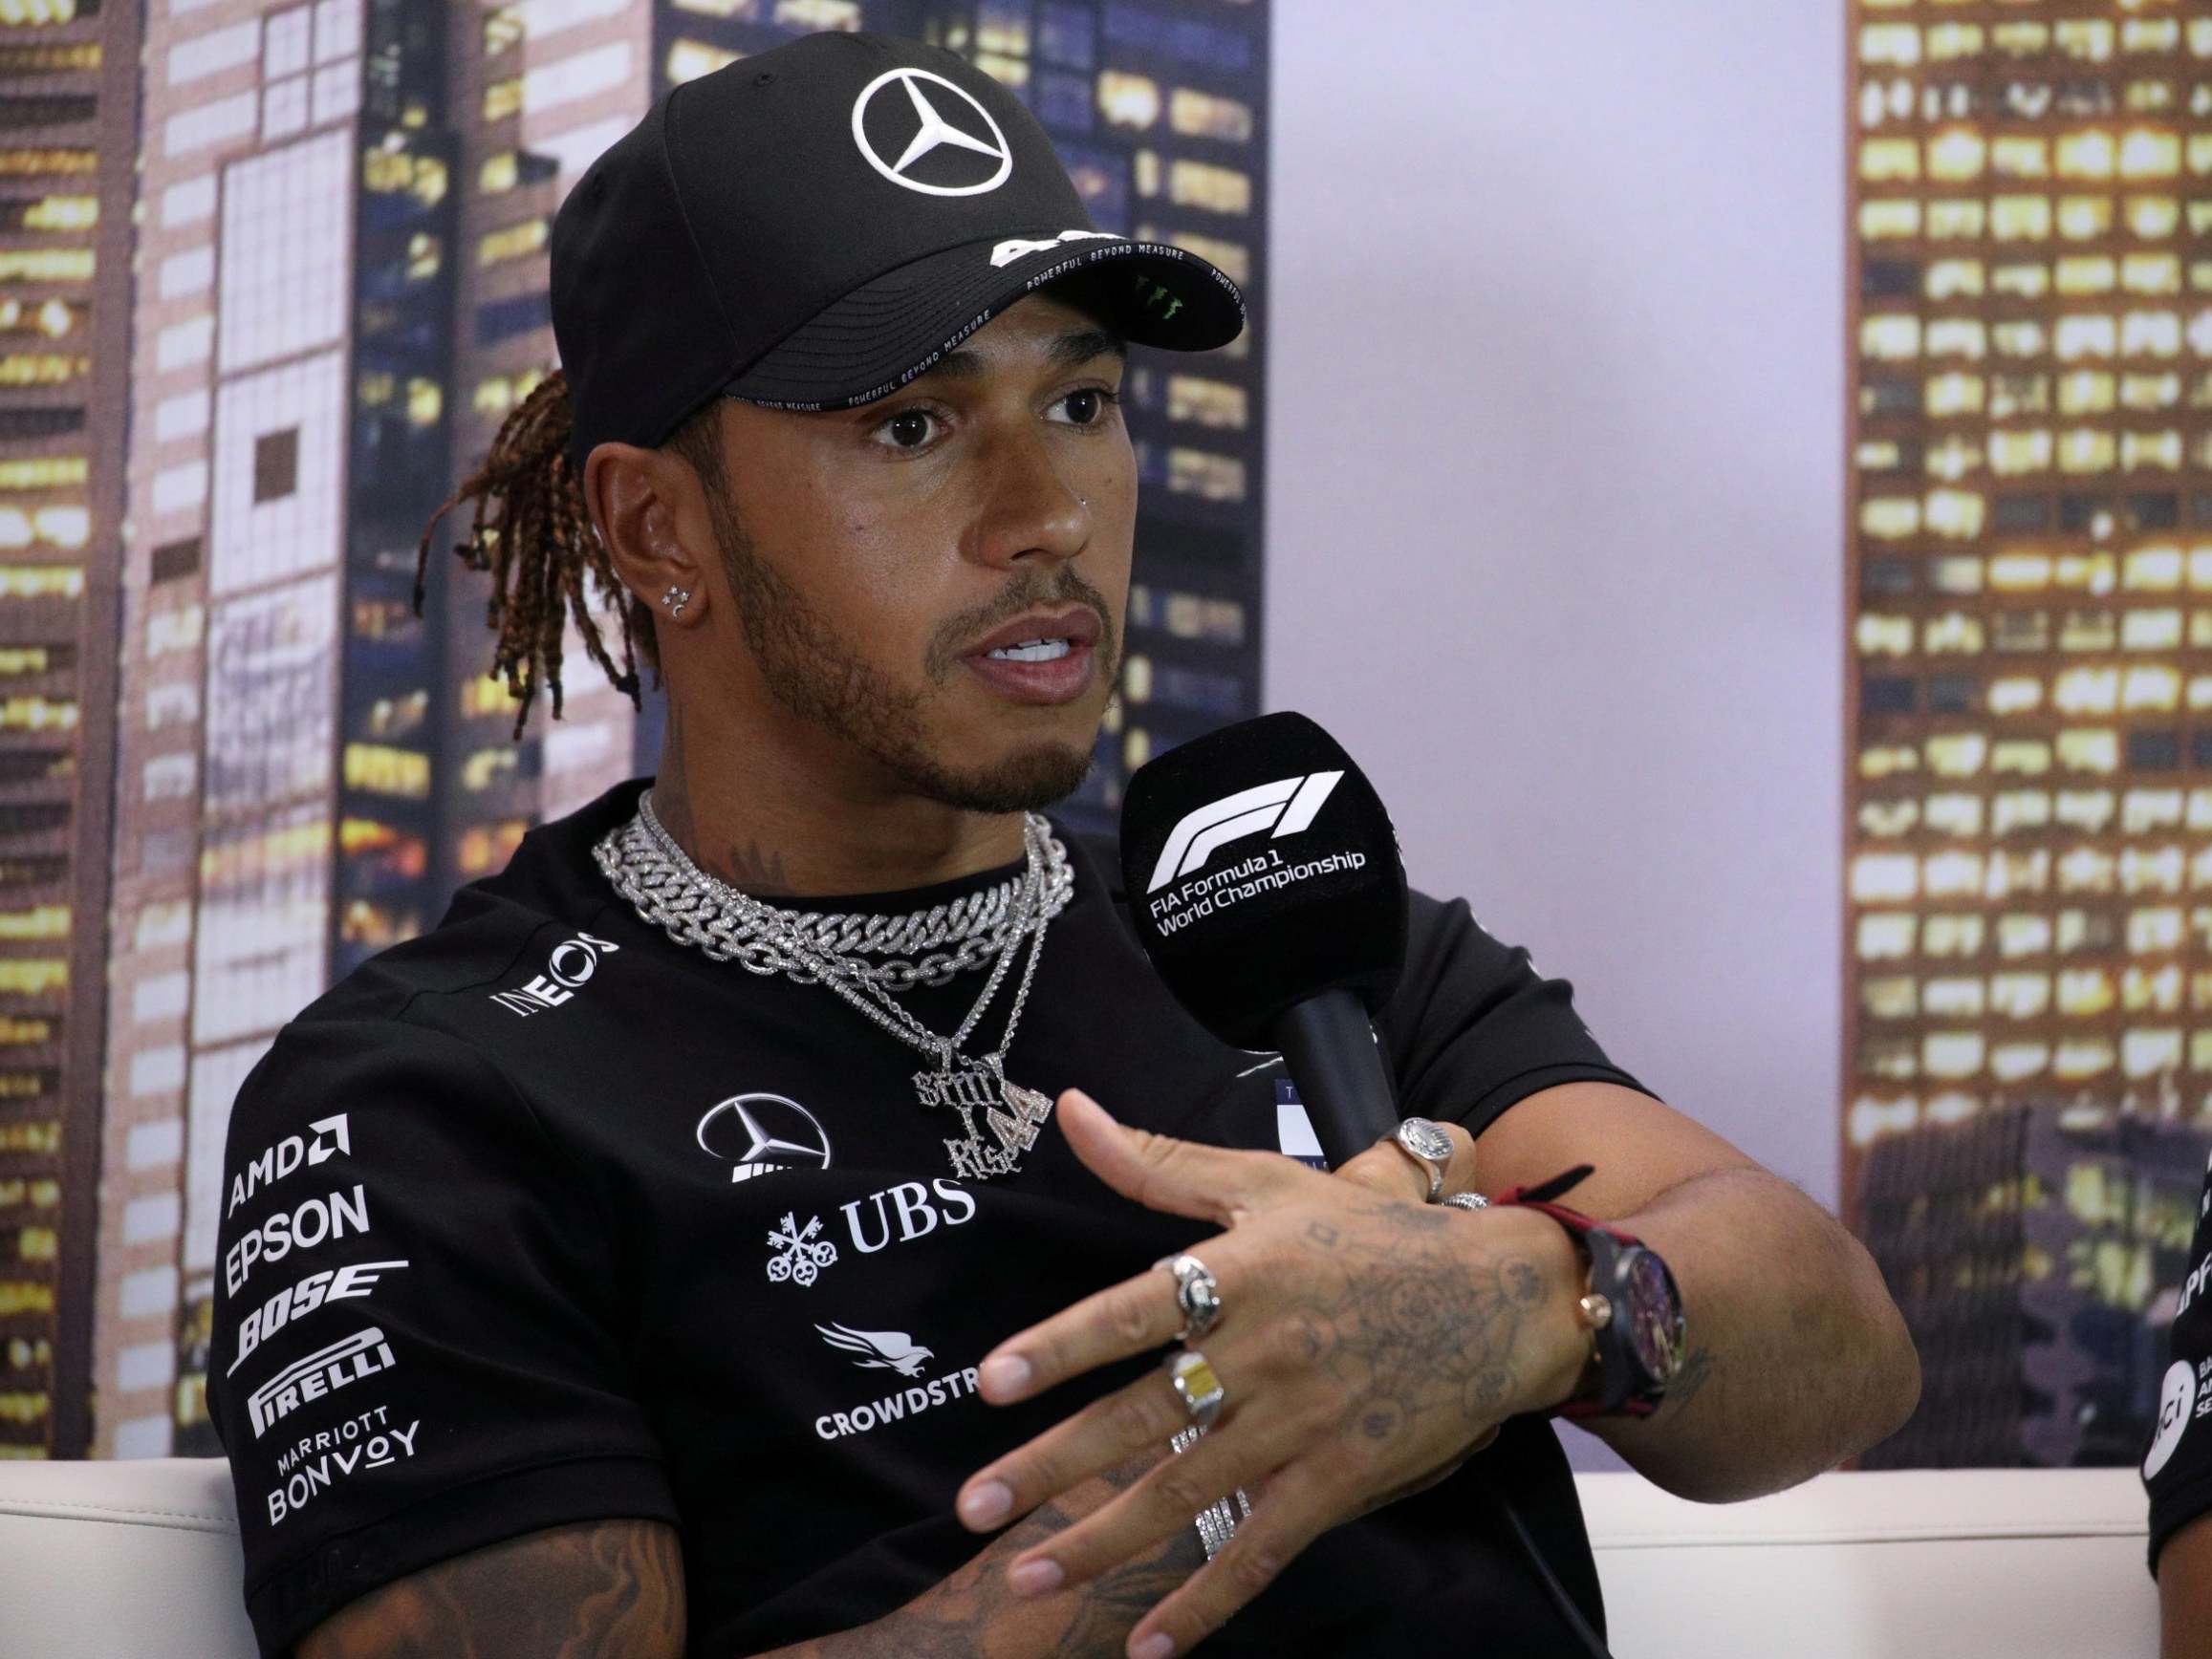 F1 drivers respond to Lewis Hamilton criticism over silence on George Floyd death